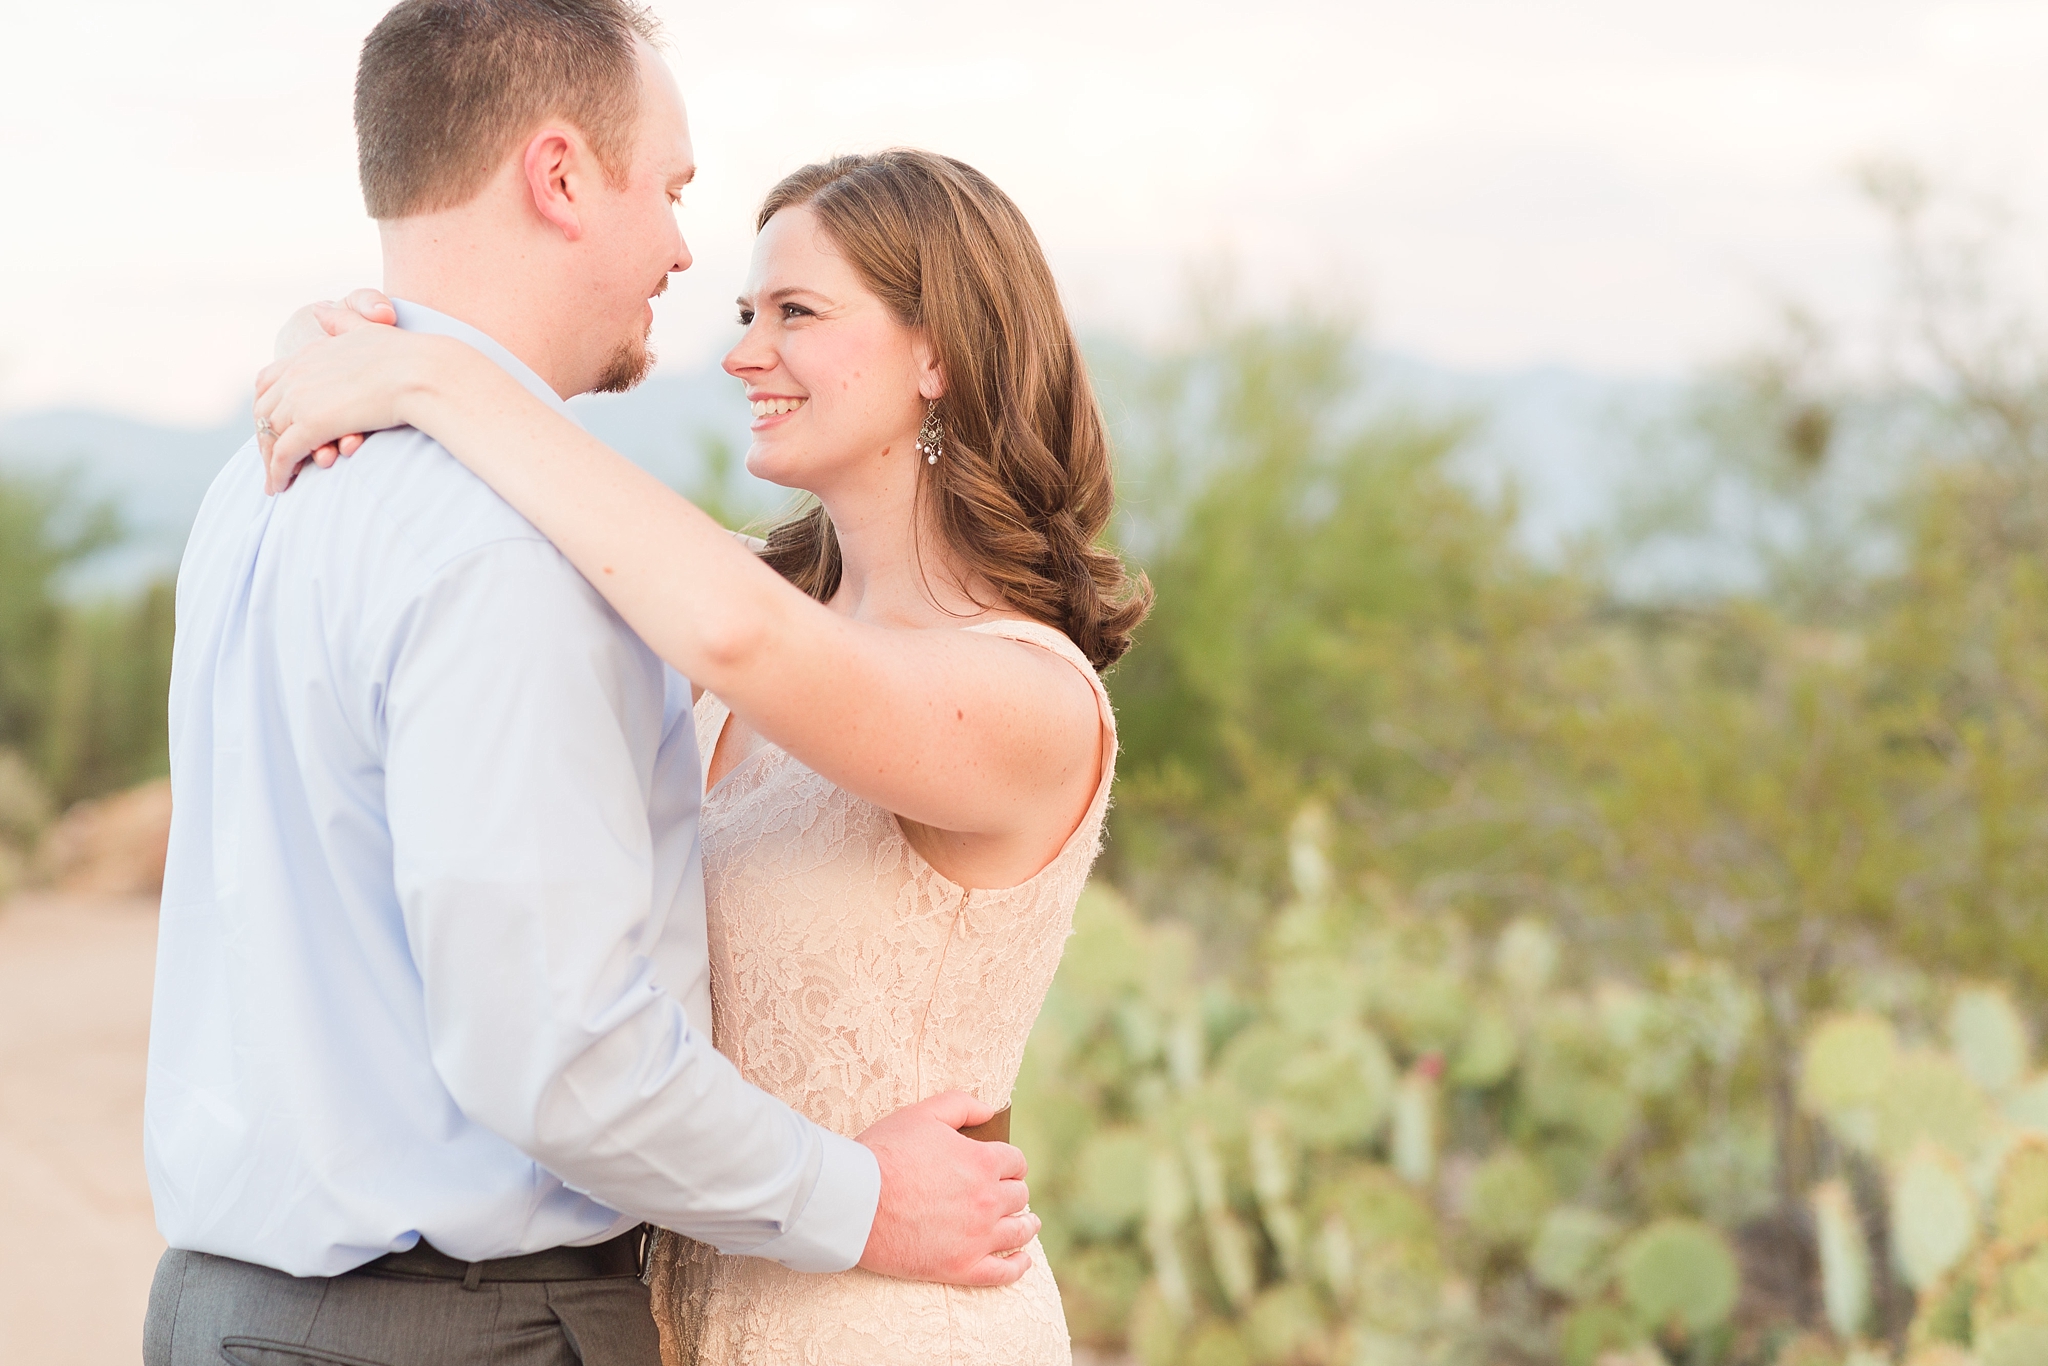 engagement photos in the desert